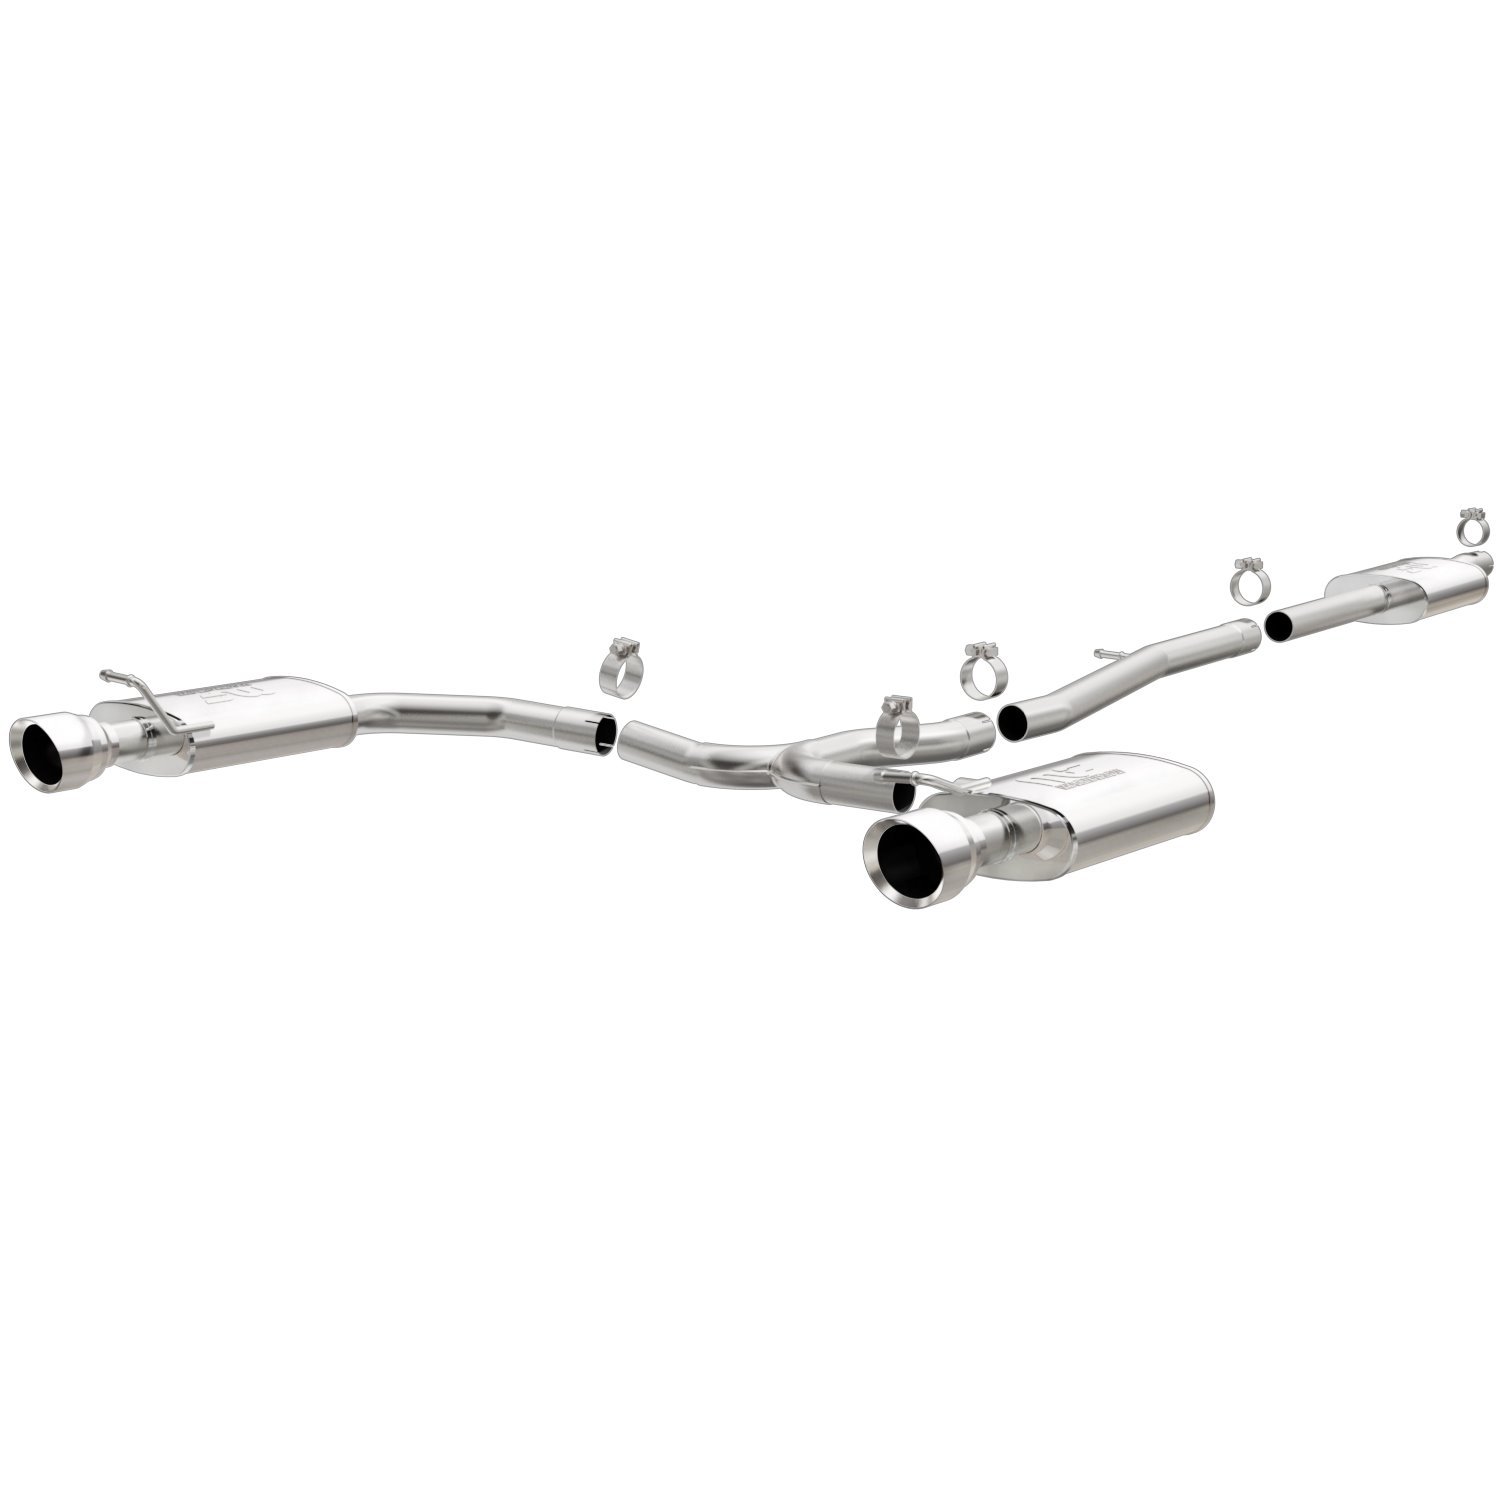 MF Series Cat-Back Exhaust System 2013-2019 Ford Flex 3.5L V6 (Excludes Turbo)